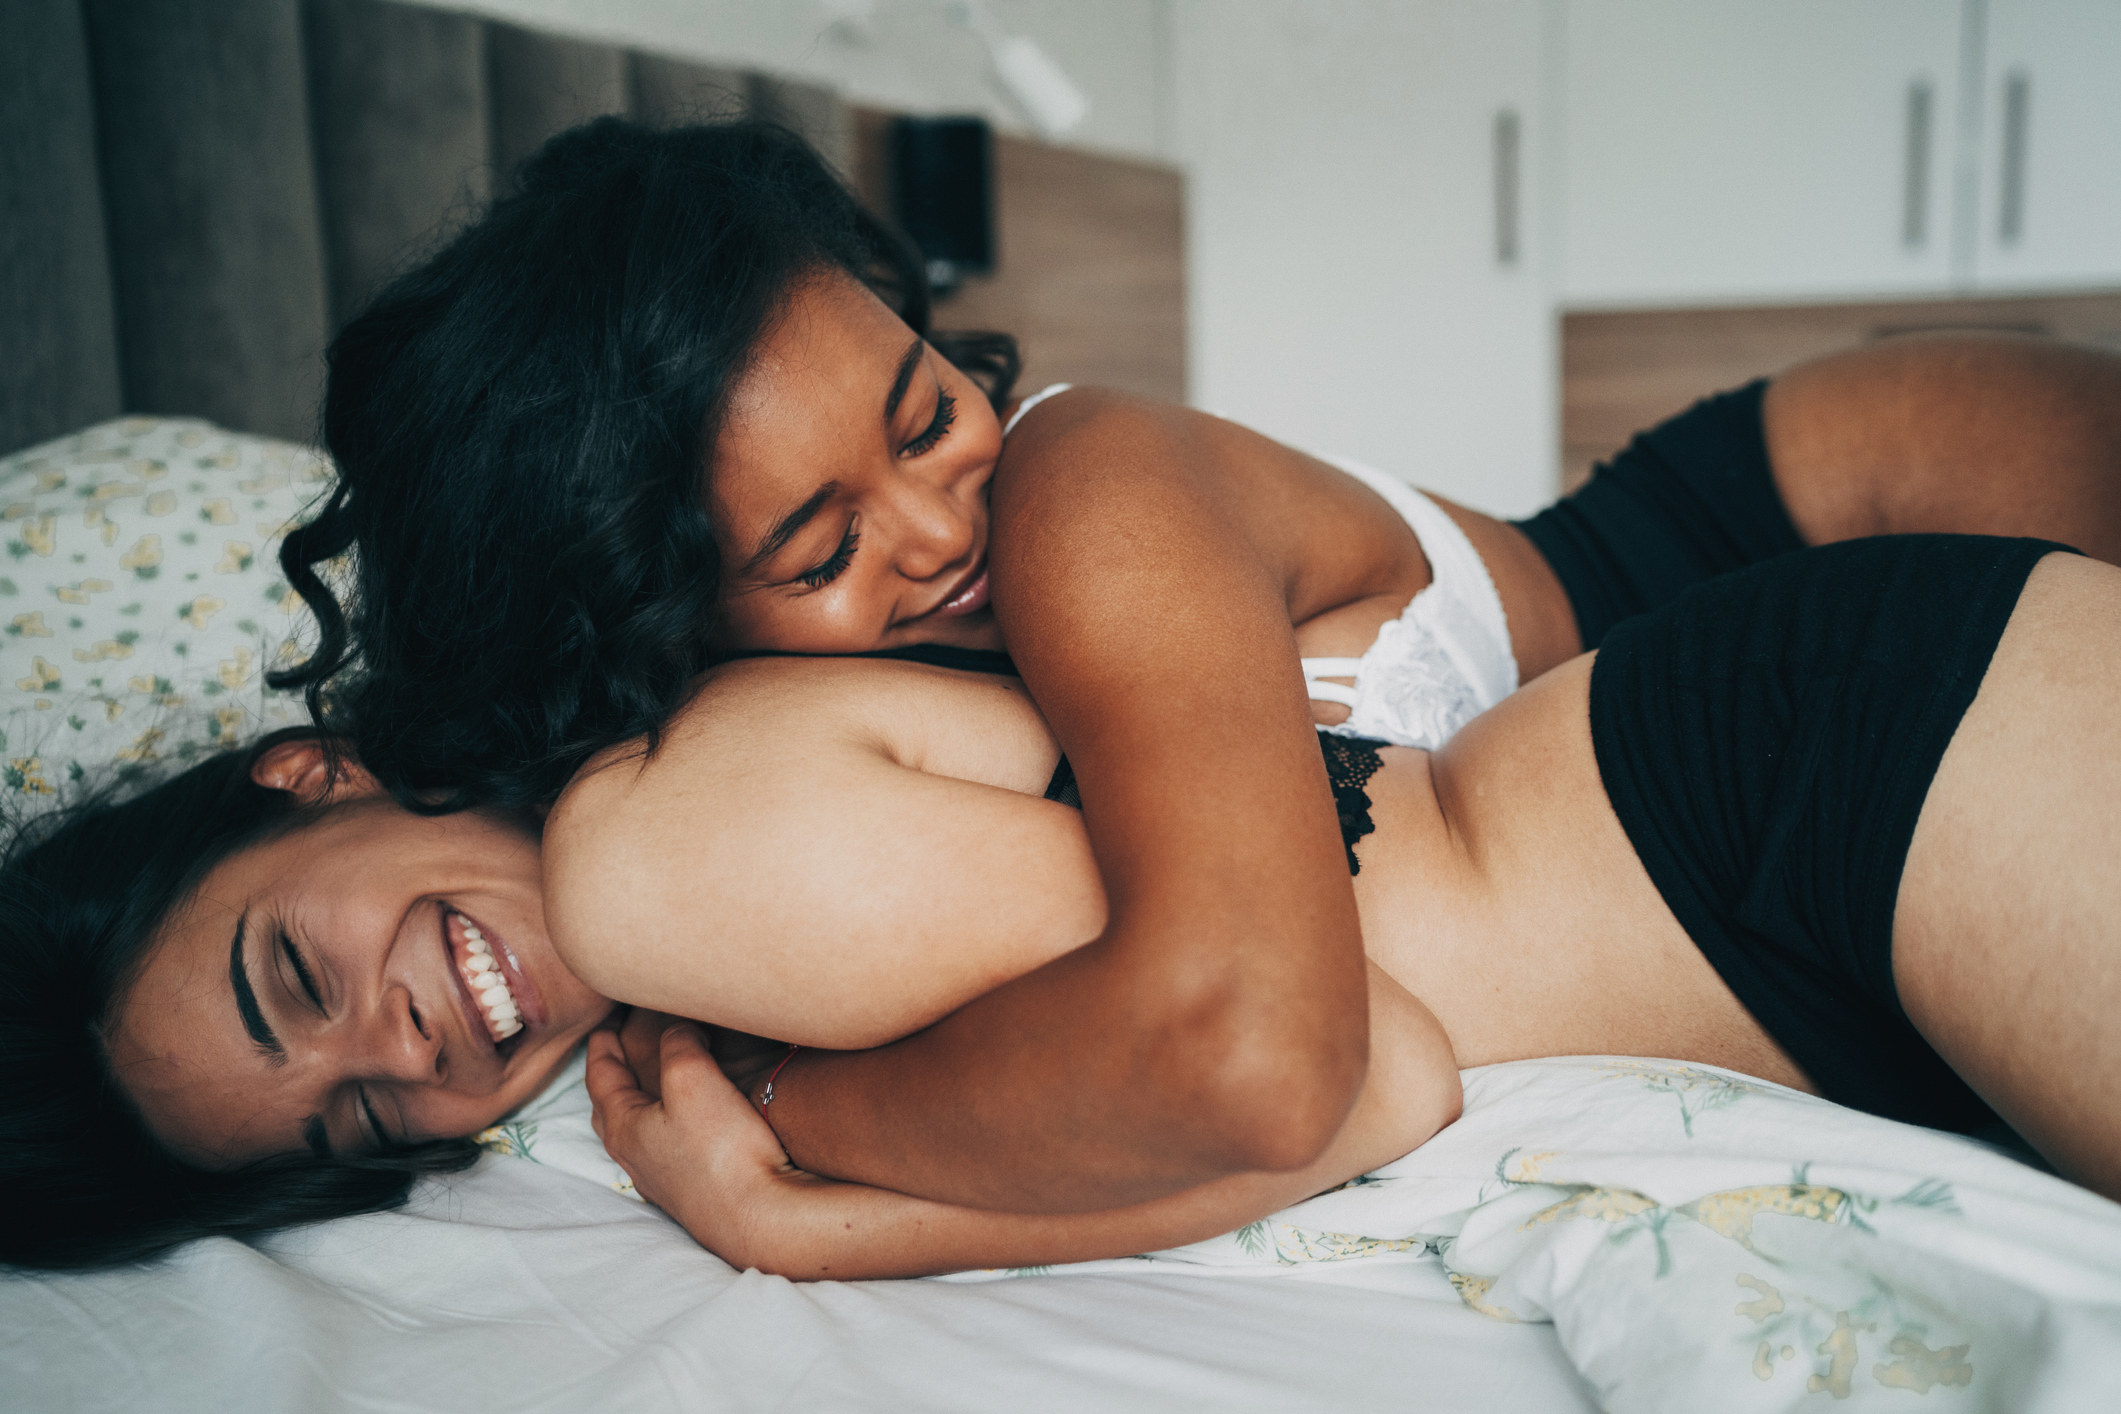 An image of two women embracing in bed